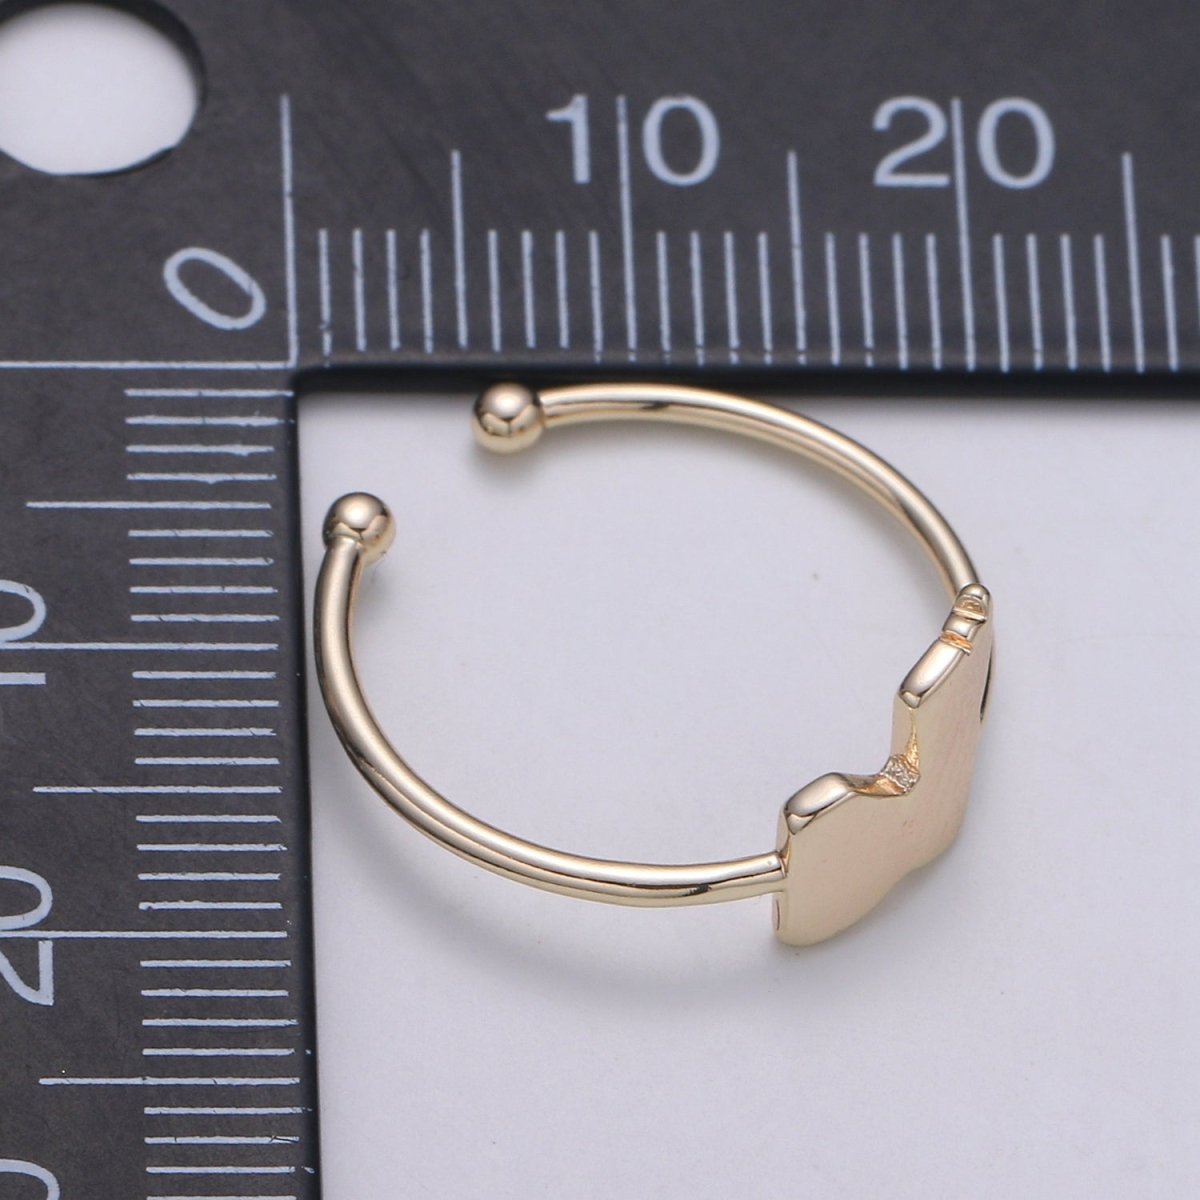 DEL-1pc Dog 18k Gold Ring, N-Adjustable Gold Curb Ring, Simple Animal Ring - 244 - DLUXCA